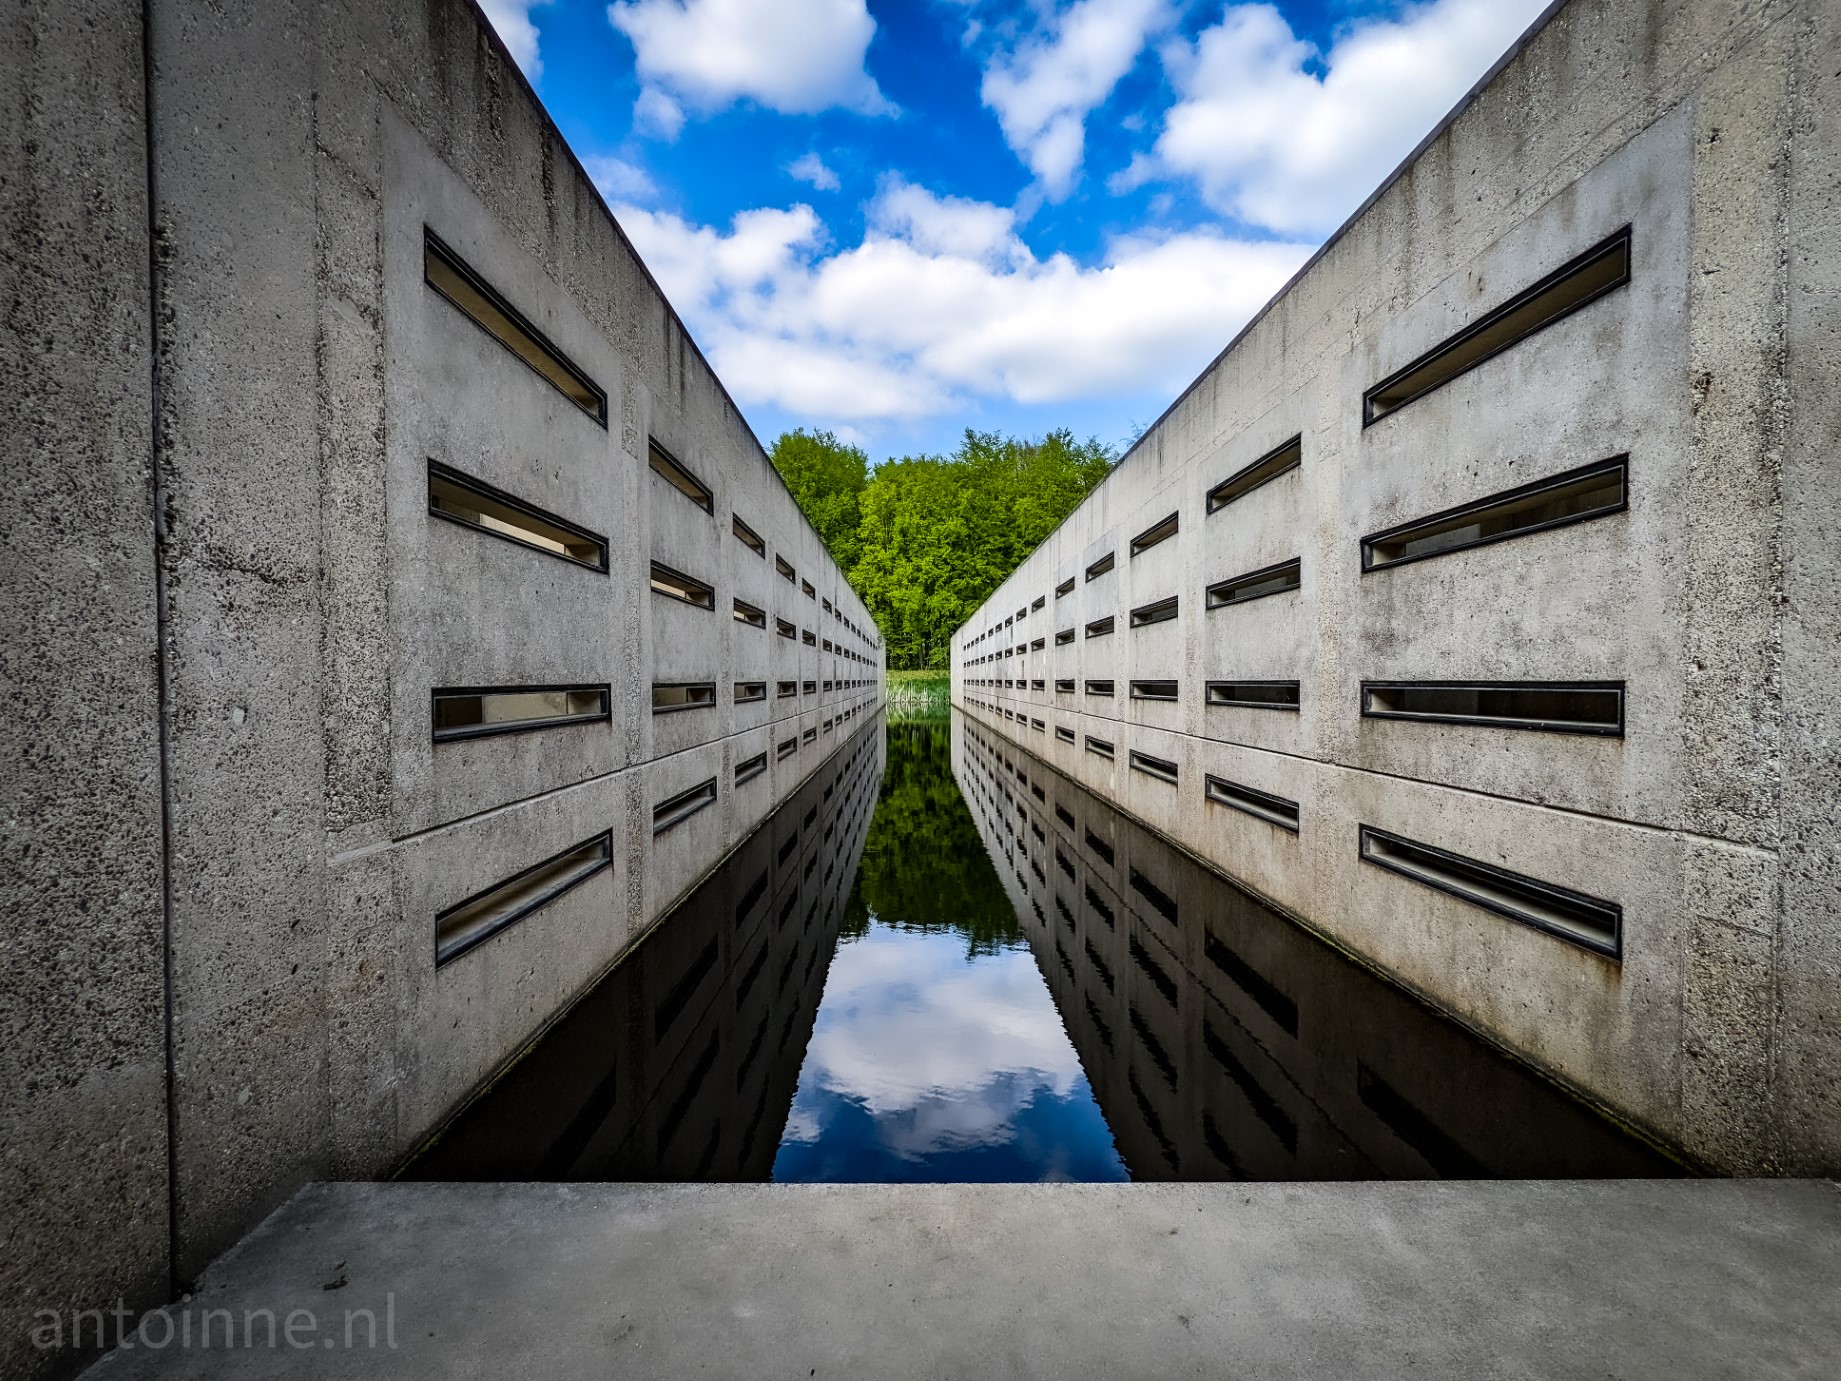 You are standing in the middle of a large monument at a former hydraulic engineering research site. Between the concrete you can see a narrow band of cloudy sky and some trees. These are also reflected in the water.